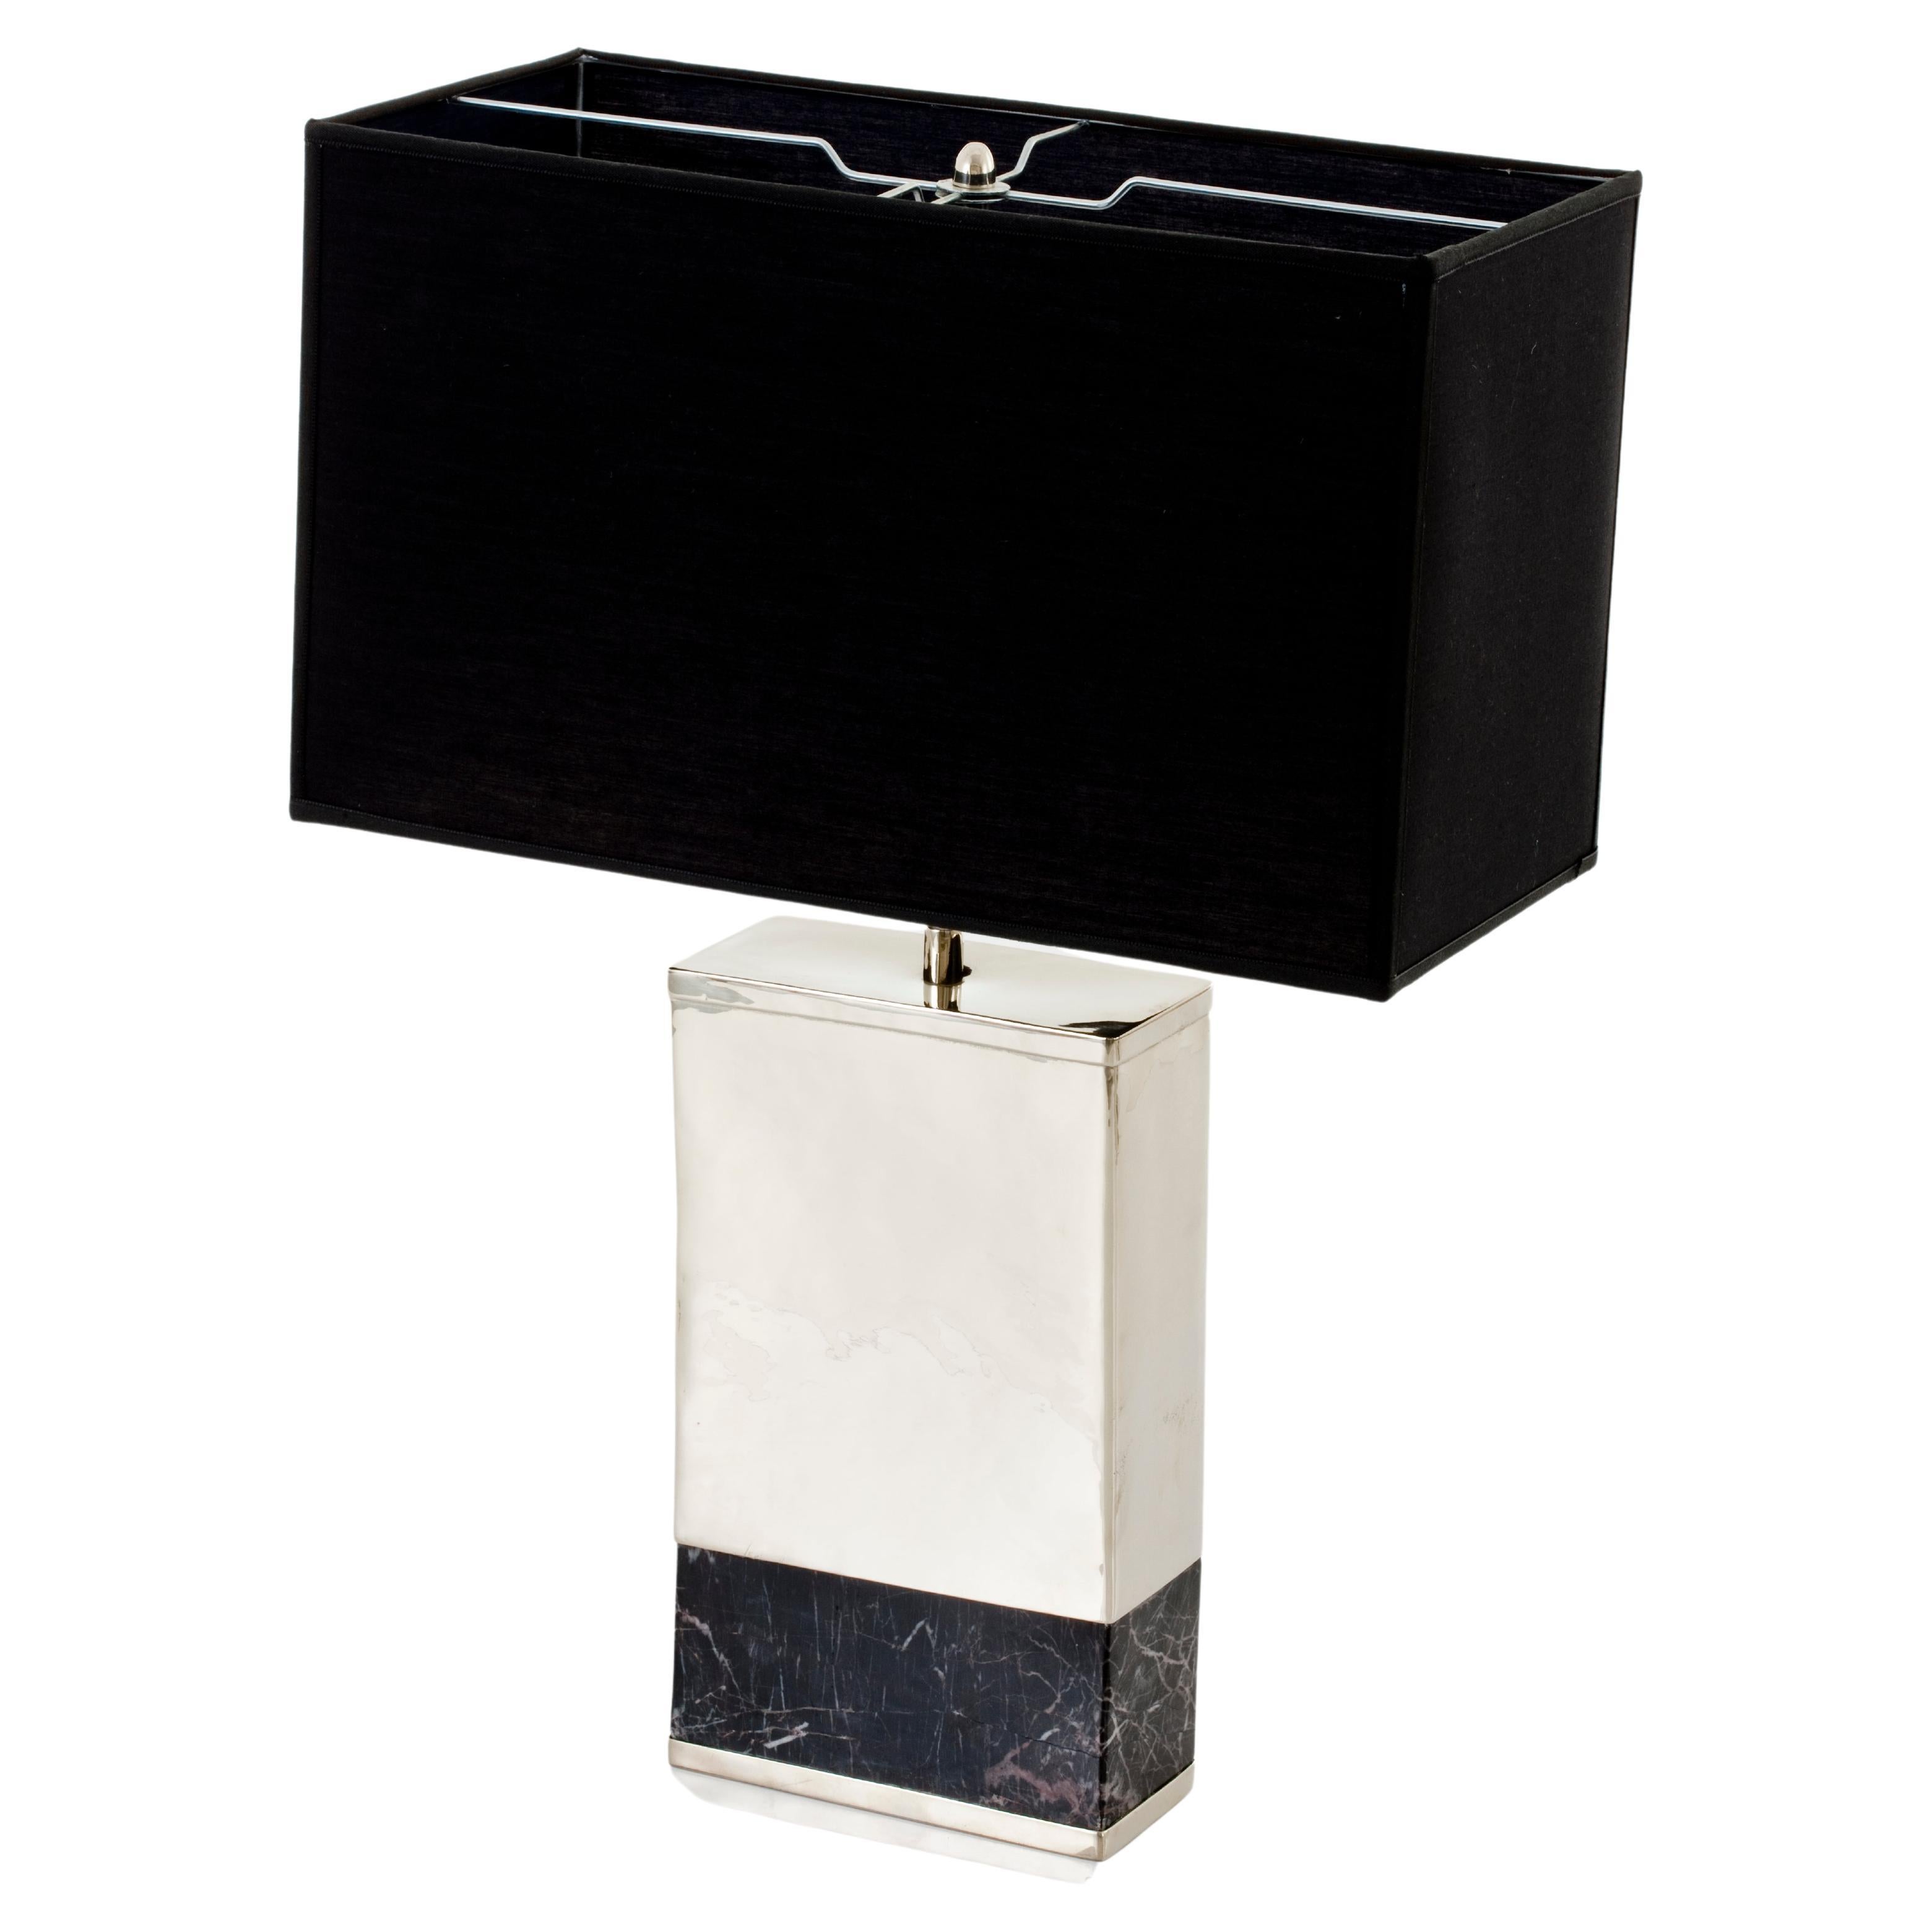 Airedelsur table lamp with onyx stone and silver alpaca, made in Argentina
Dimensions:
Fabric lampshade D 7.87” x 22.44” H x 15.74